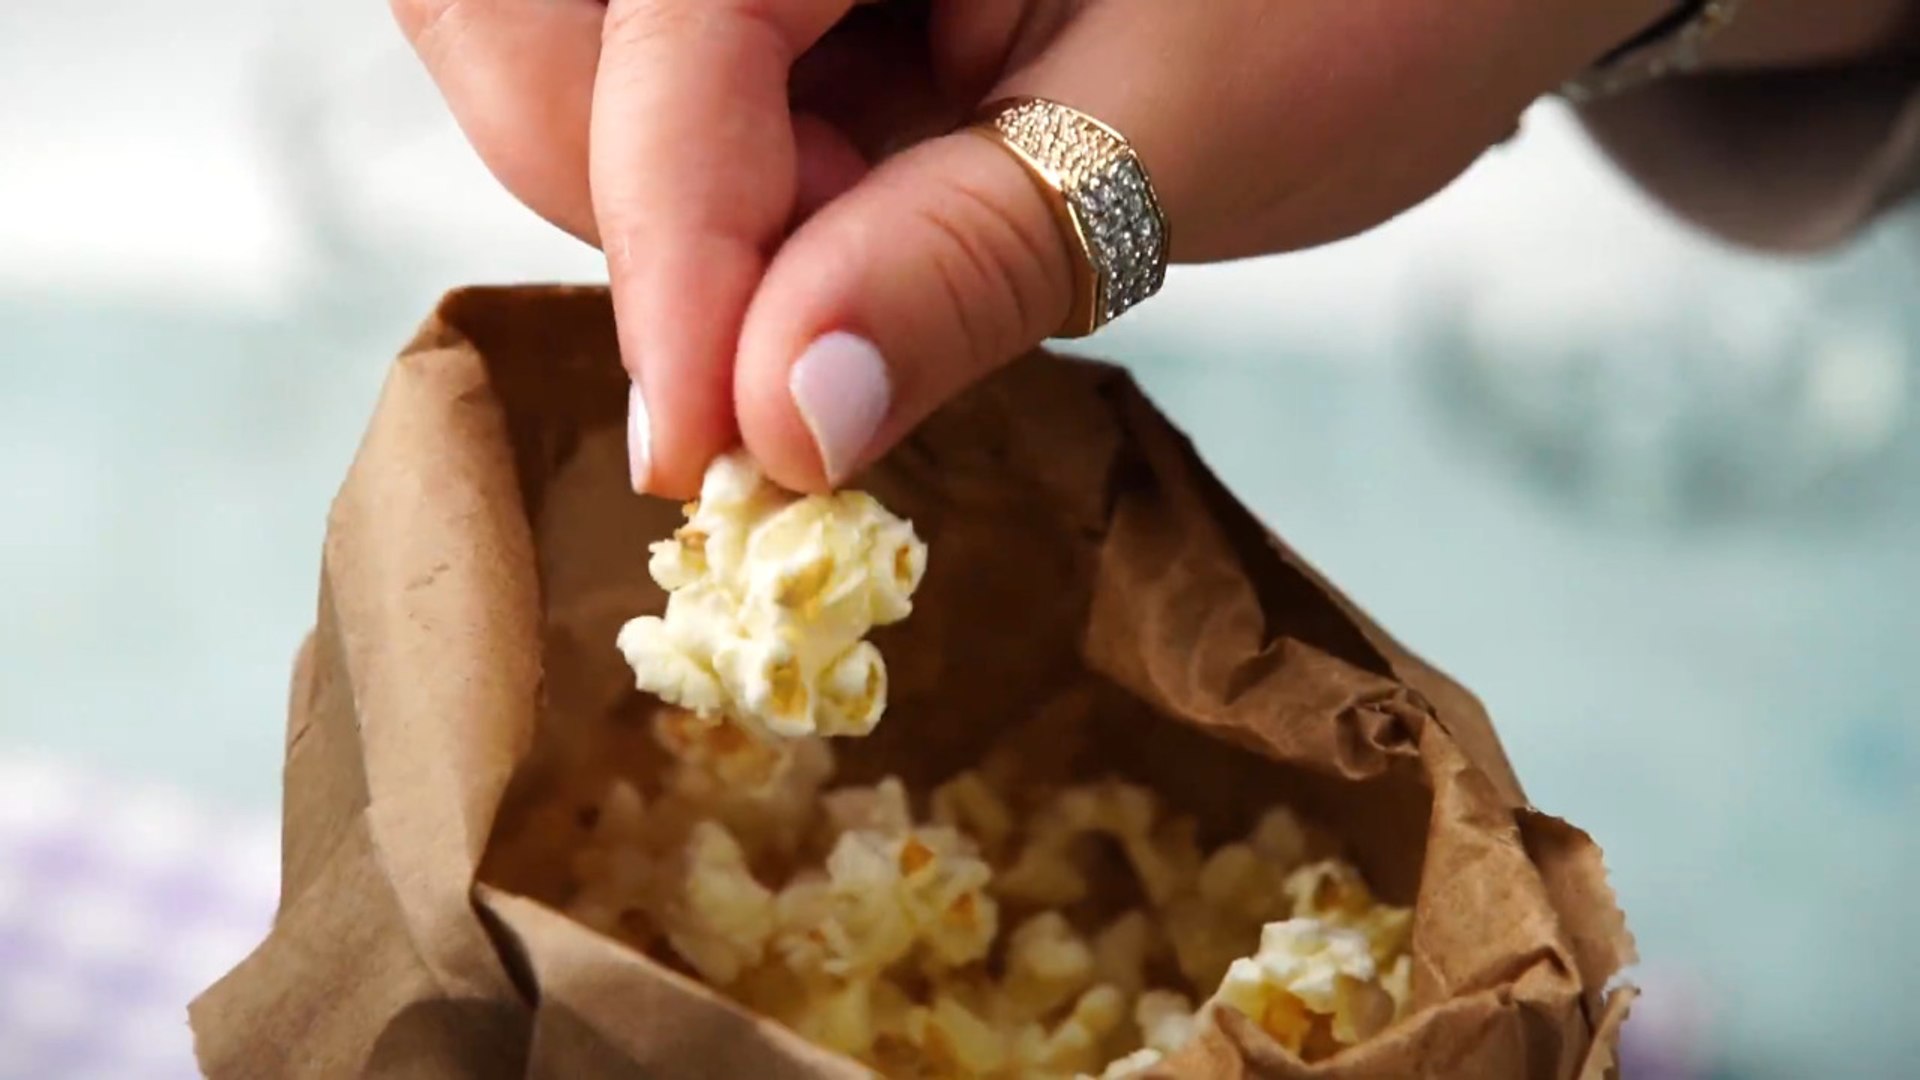 The latest Popcorn videos on Dailymotion